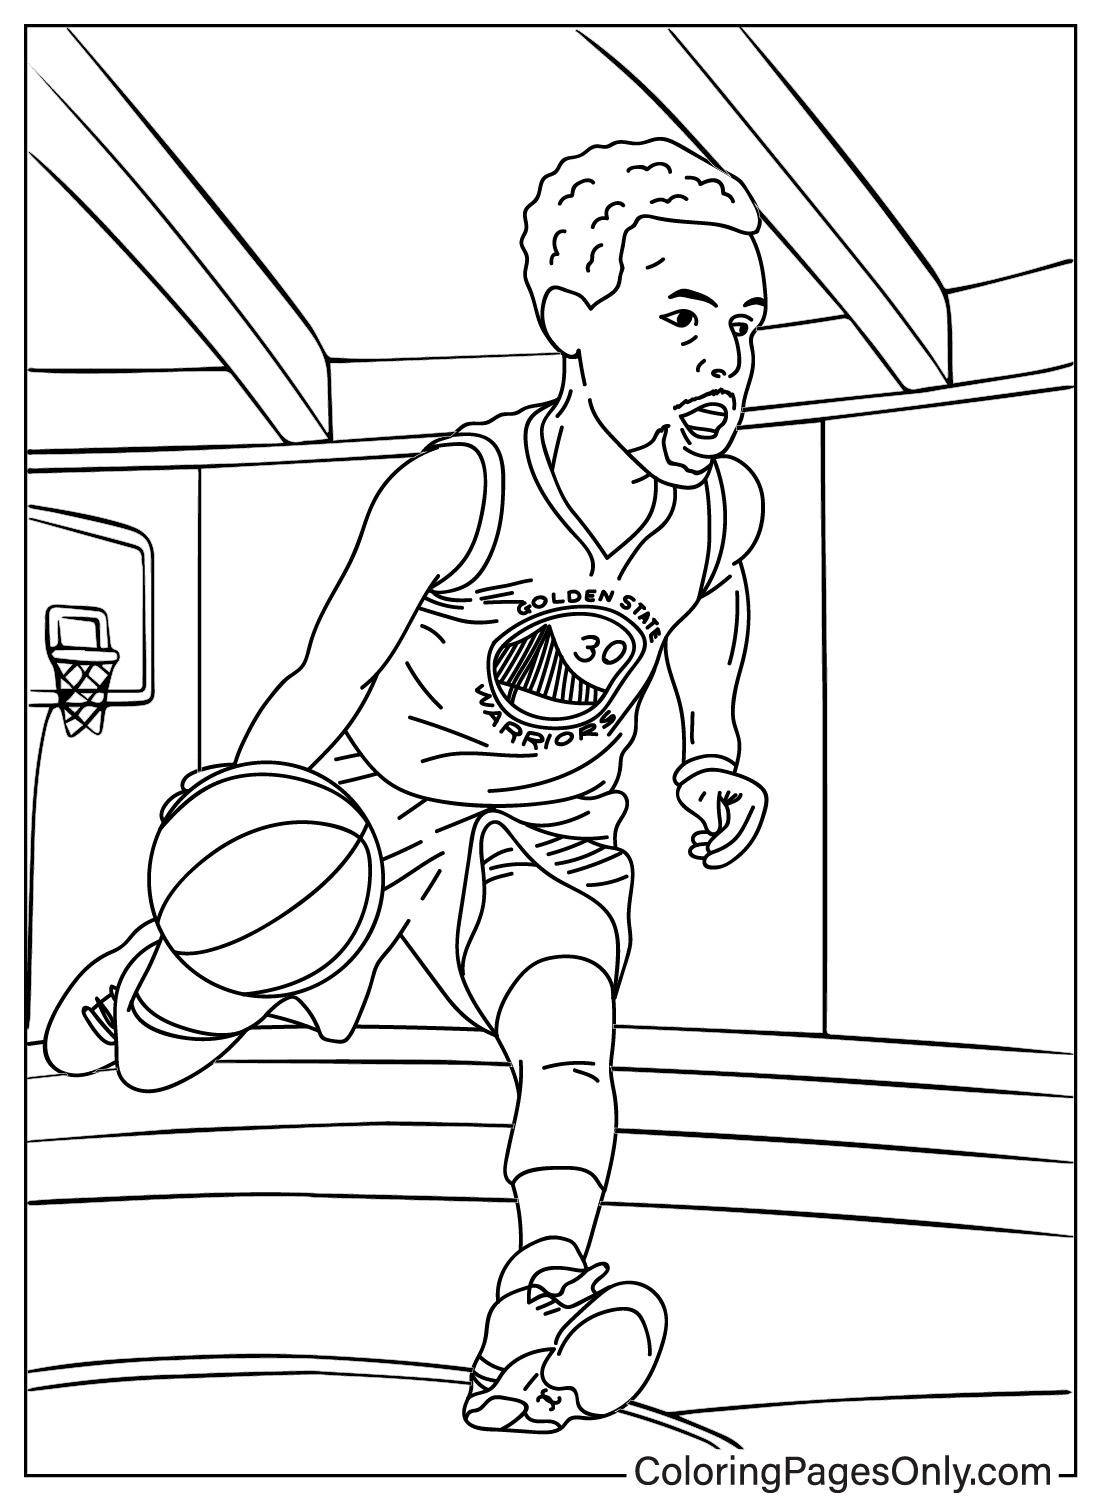 Coloring pages only on x ð stephen curry coloring pages collection httpstcovnjkcrtrh stephencurry people coloringpagesonly coloringpages coloringbook art fanart sketch drawing draw coloring usa trend trending trendingnow